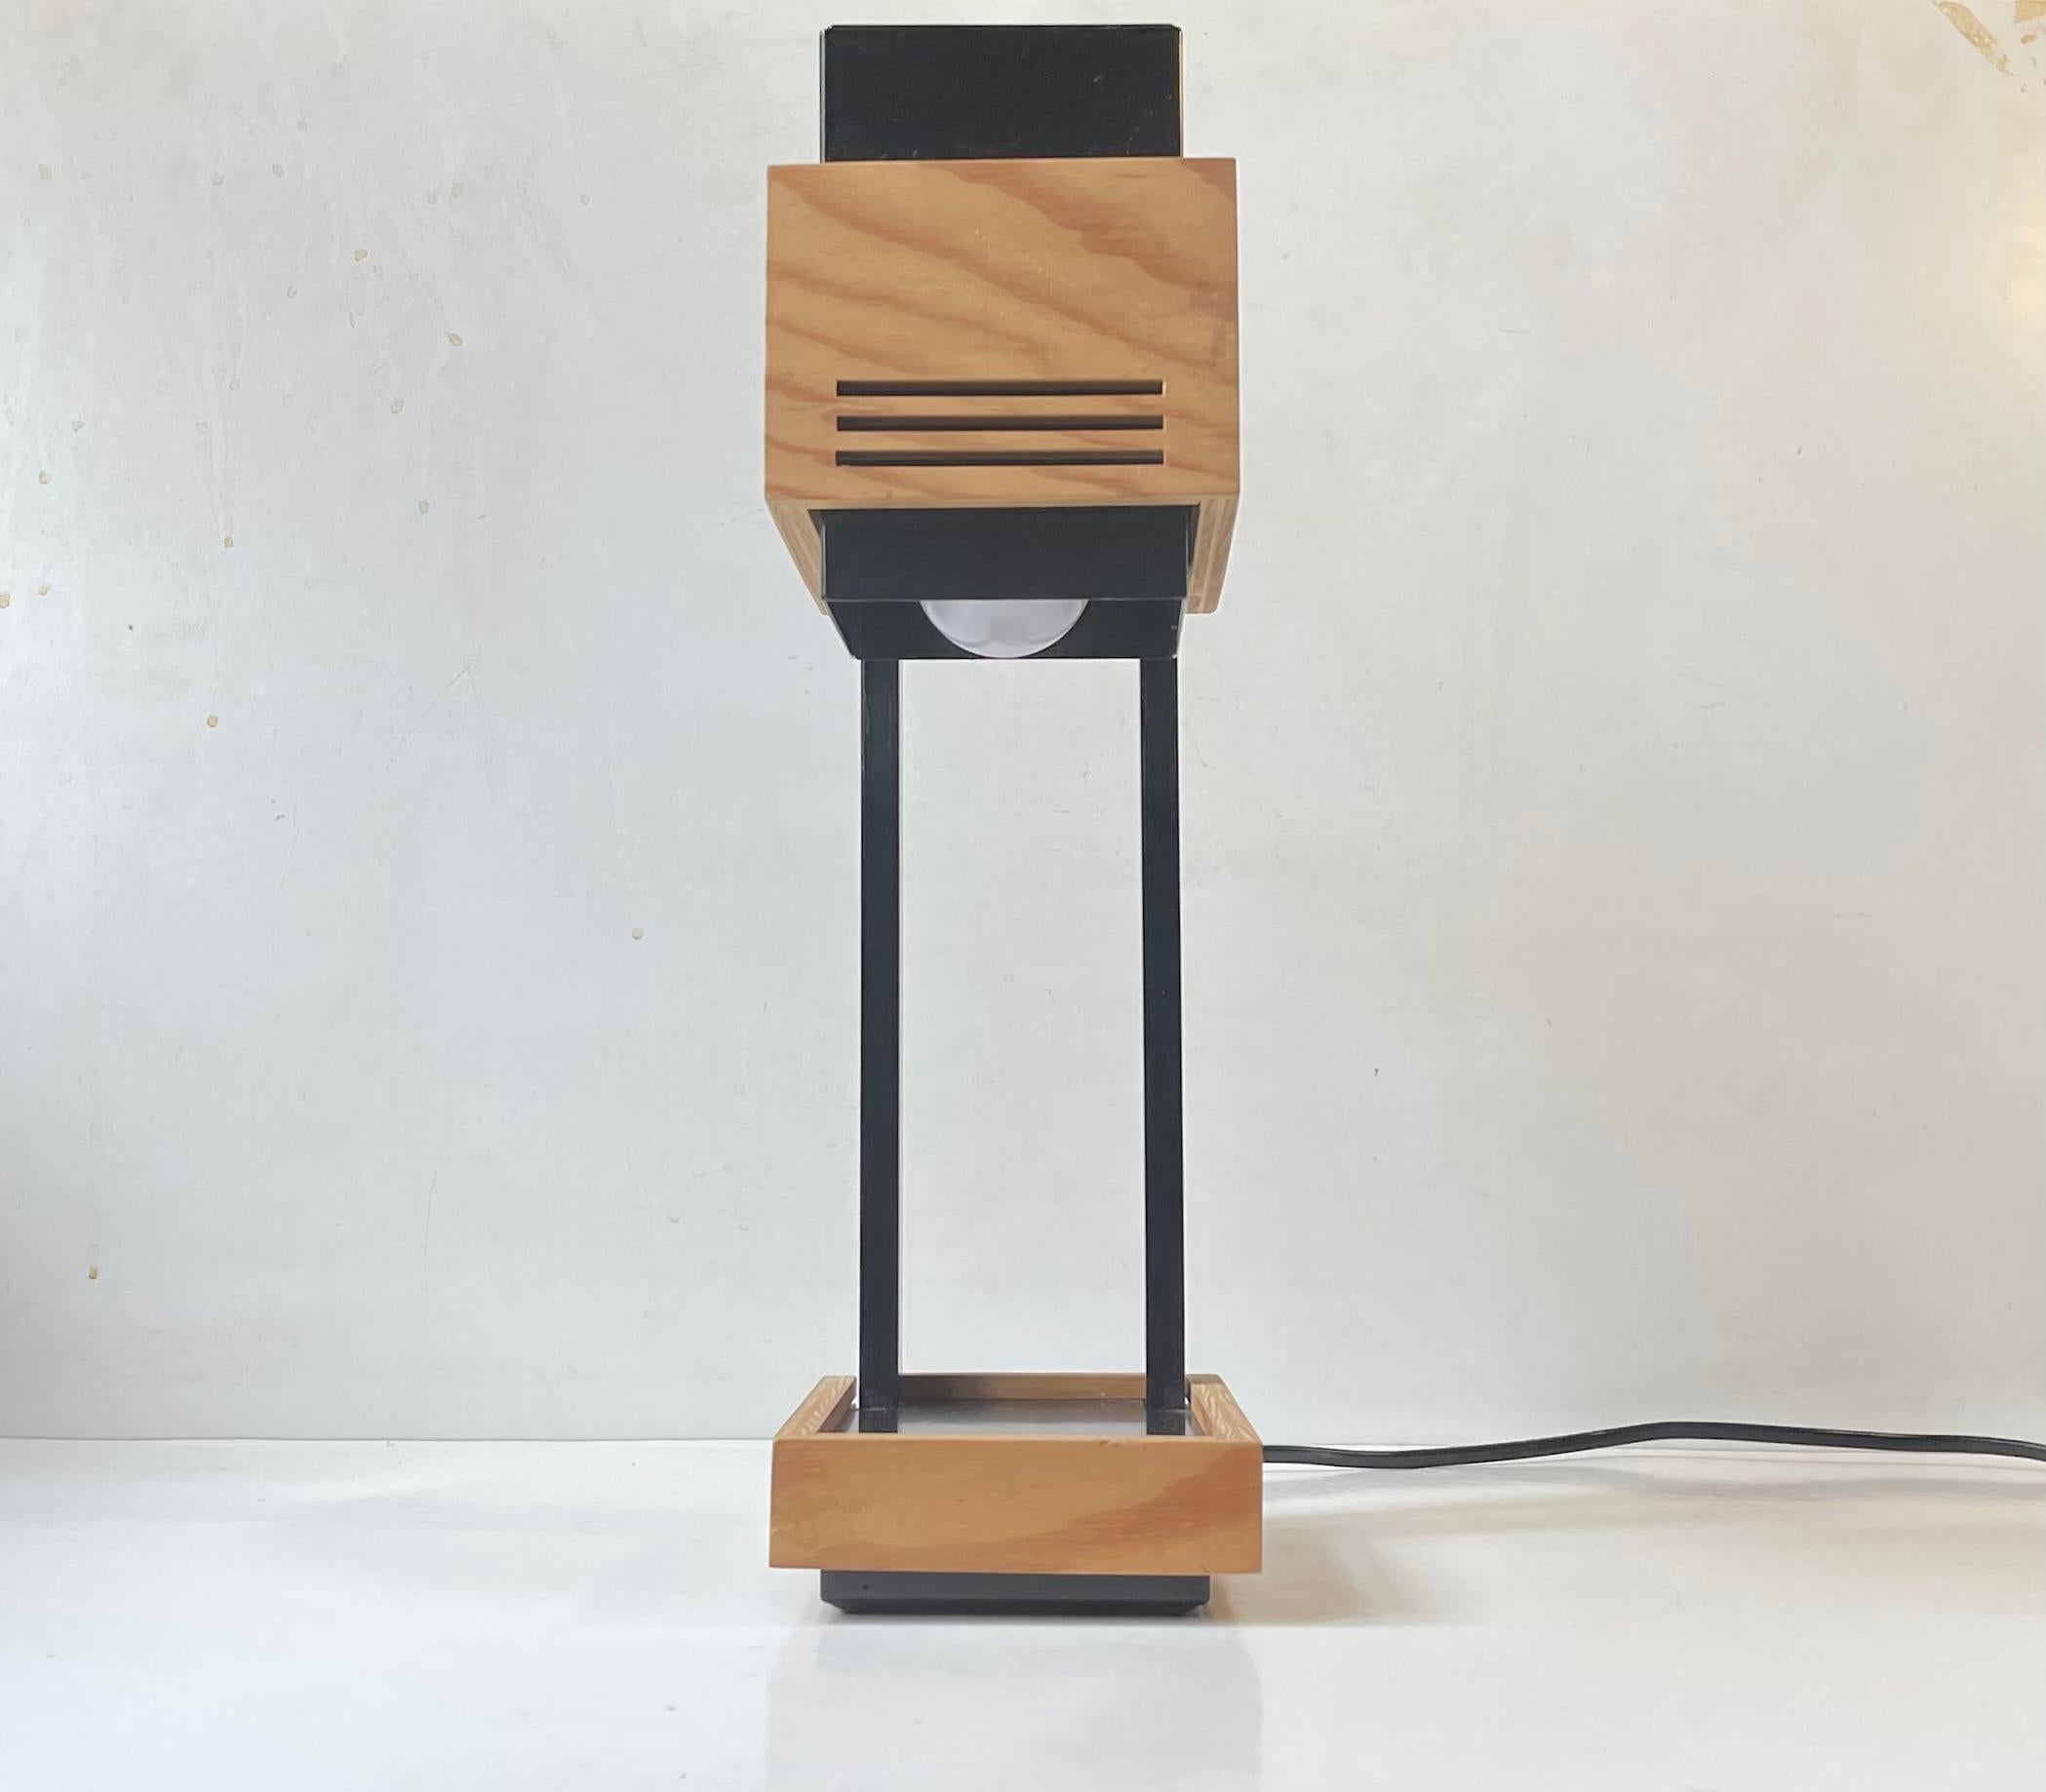 Claus Bolby Cubist Table Lamp in Plywood and Steel for Cebo Industri, 1970s For Sale 1